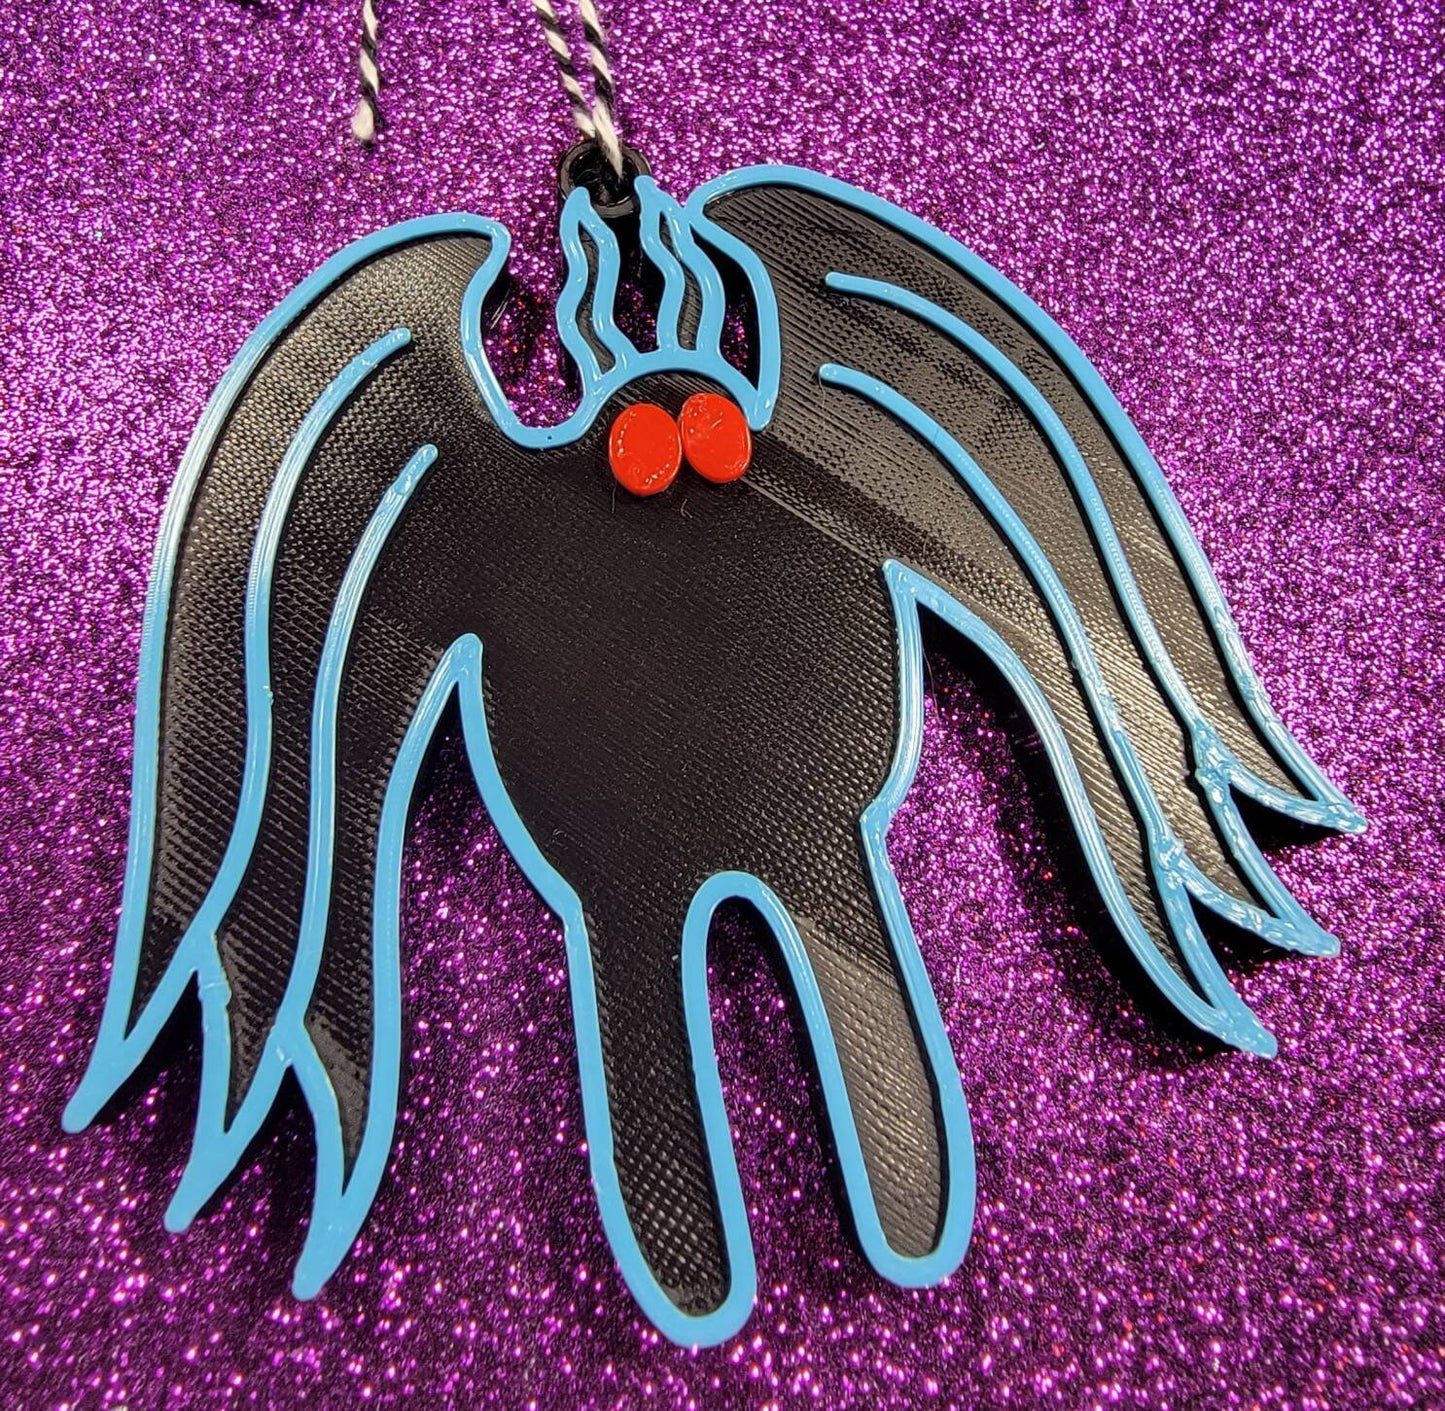 Mothman 3D Printed Cryptid Spooky Christmas Ornament